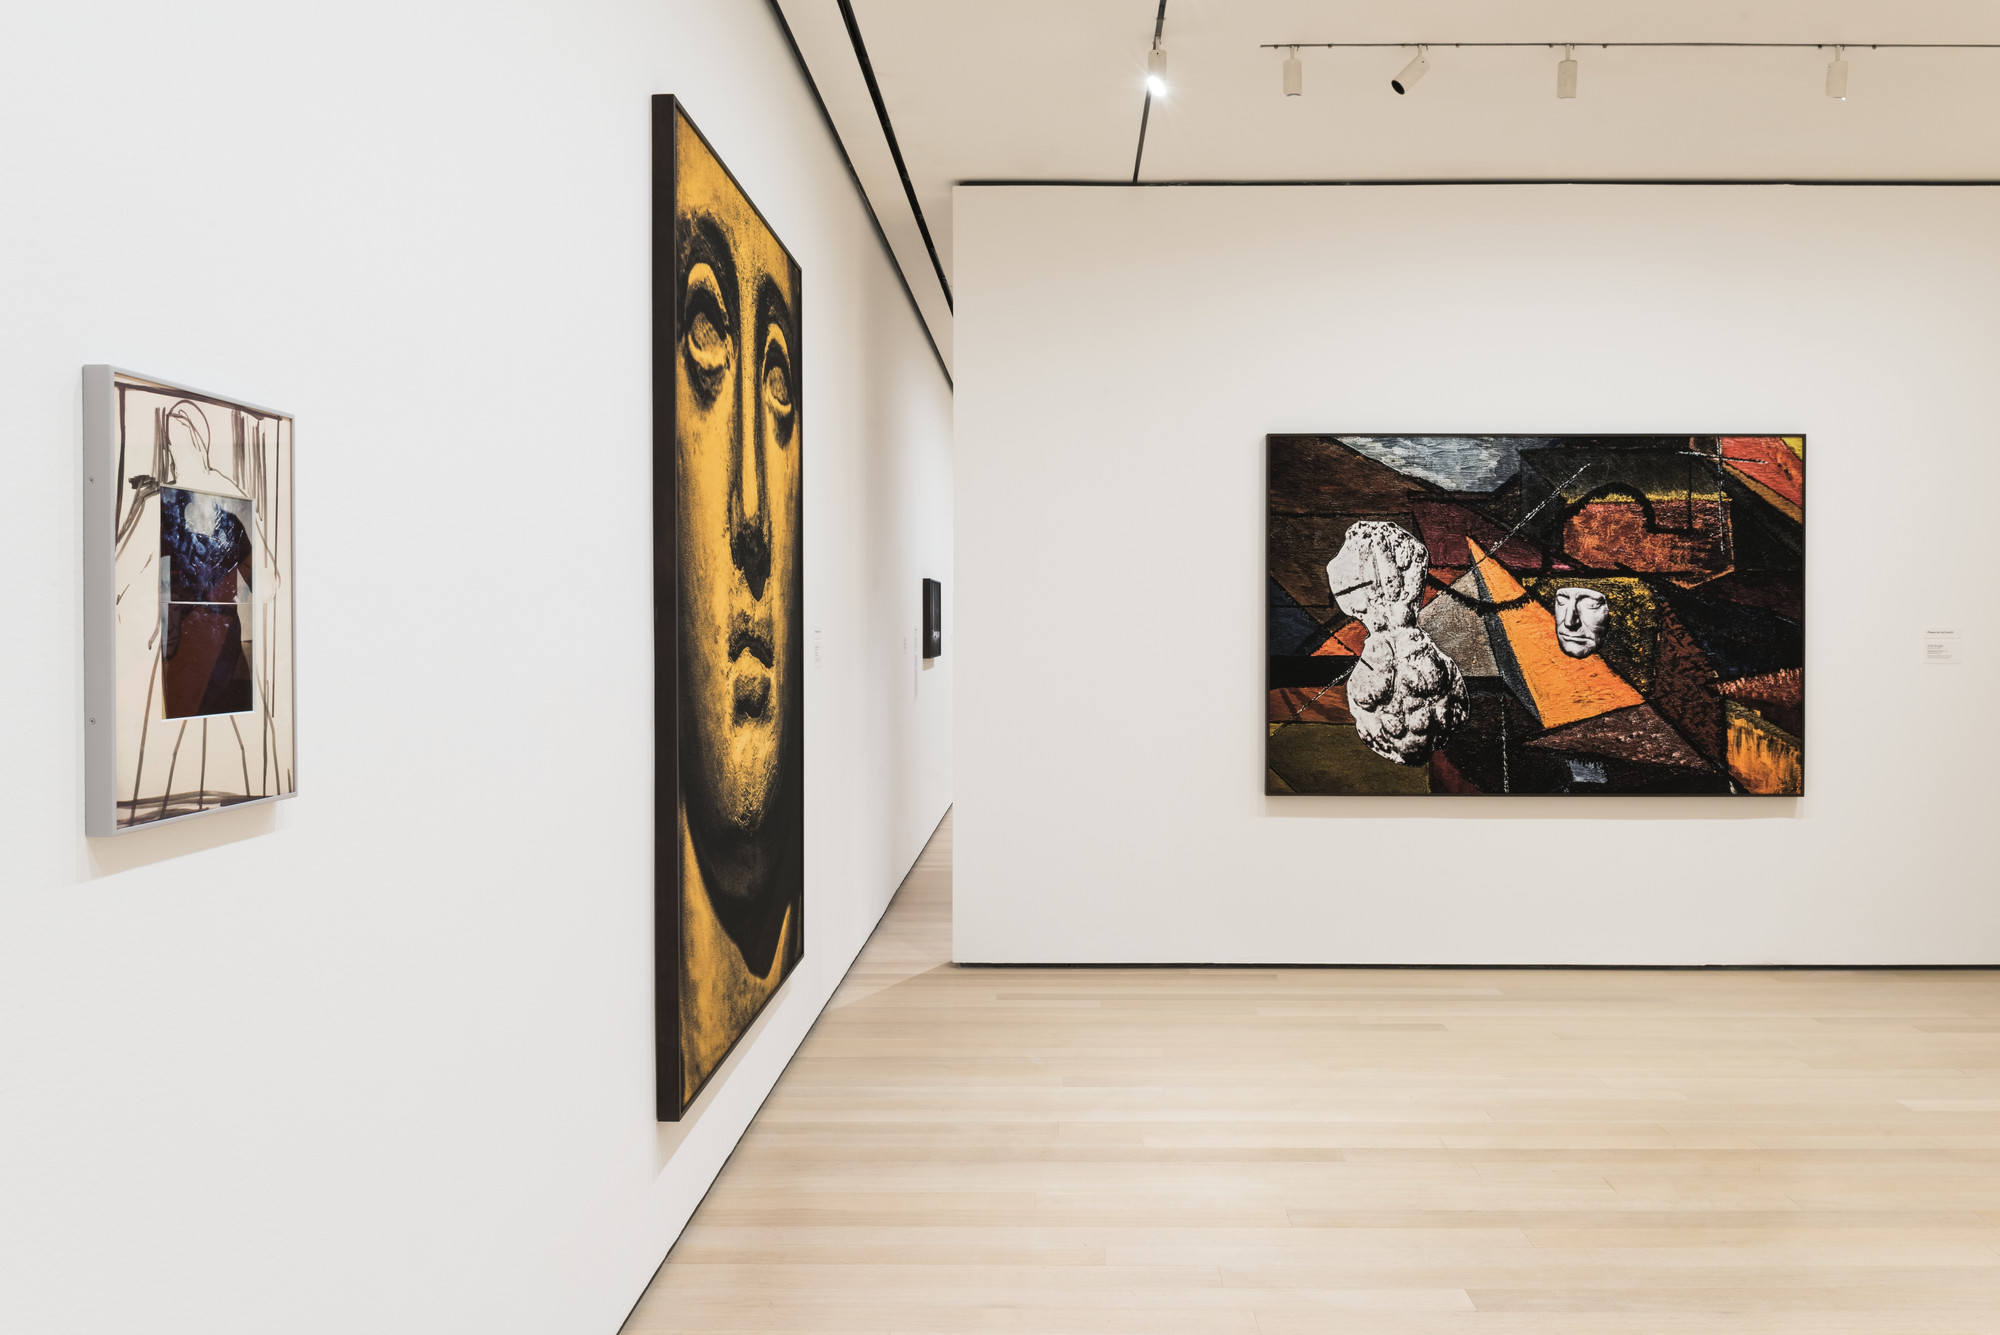 Installation view of the exhibition "Being New Photography 2018" MoMA